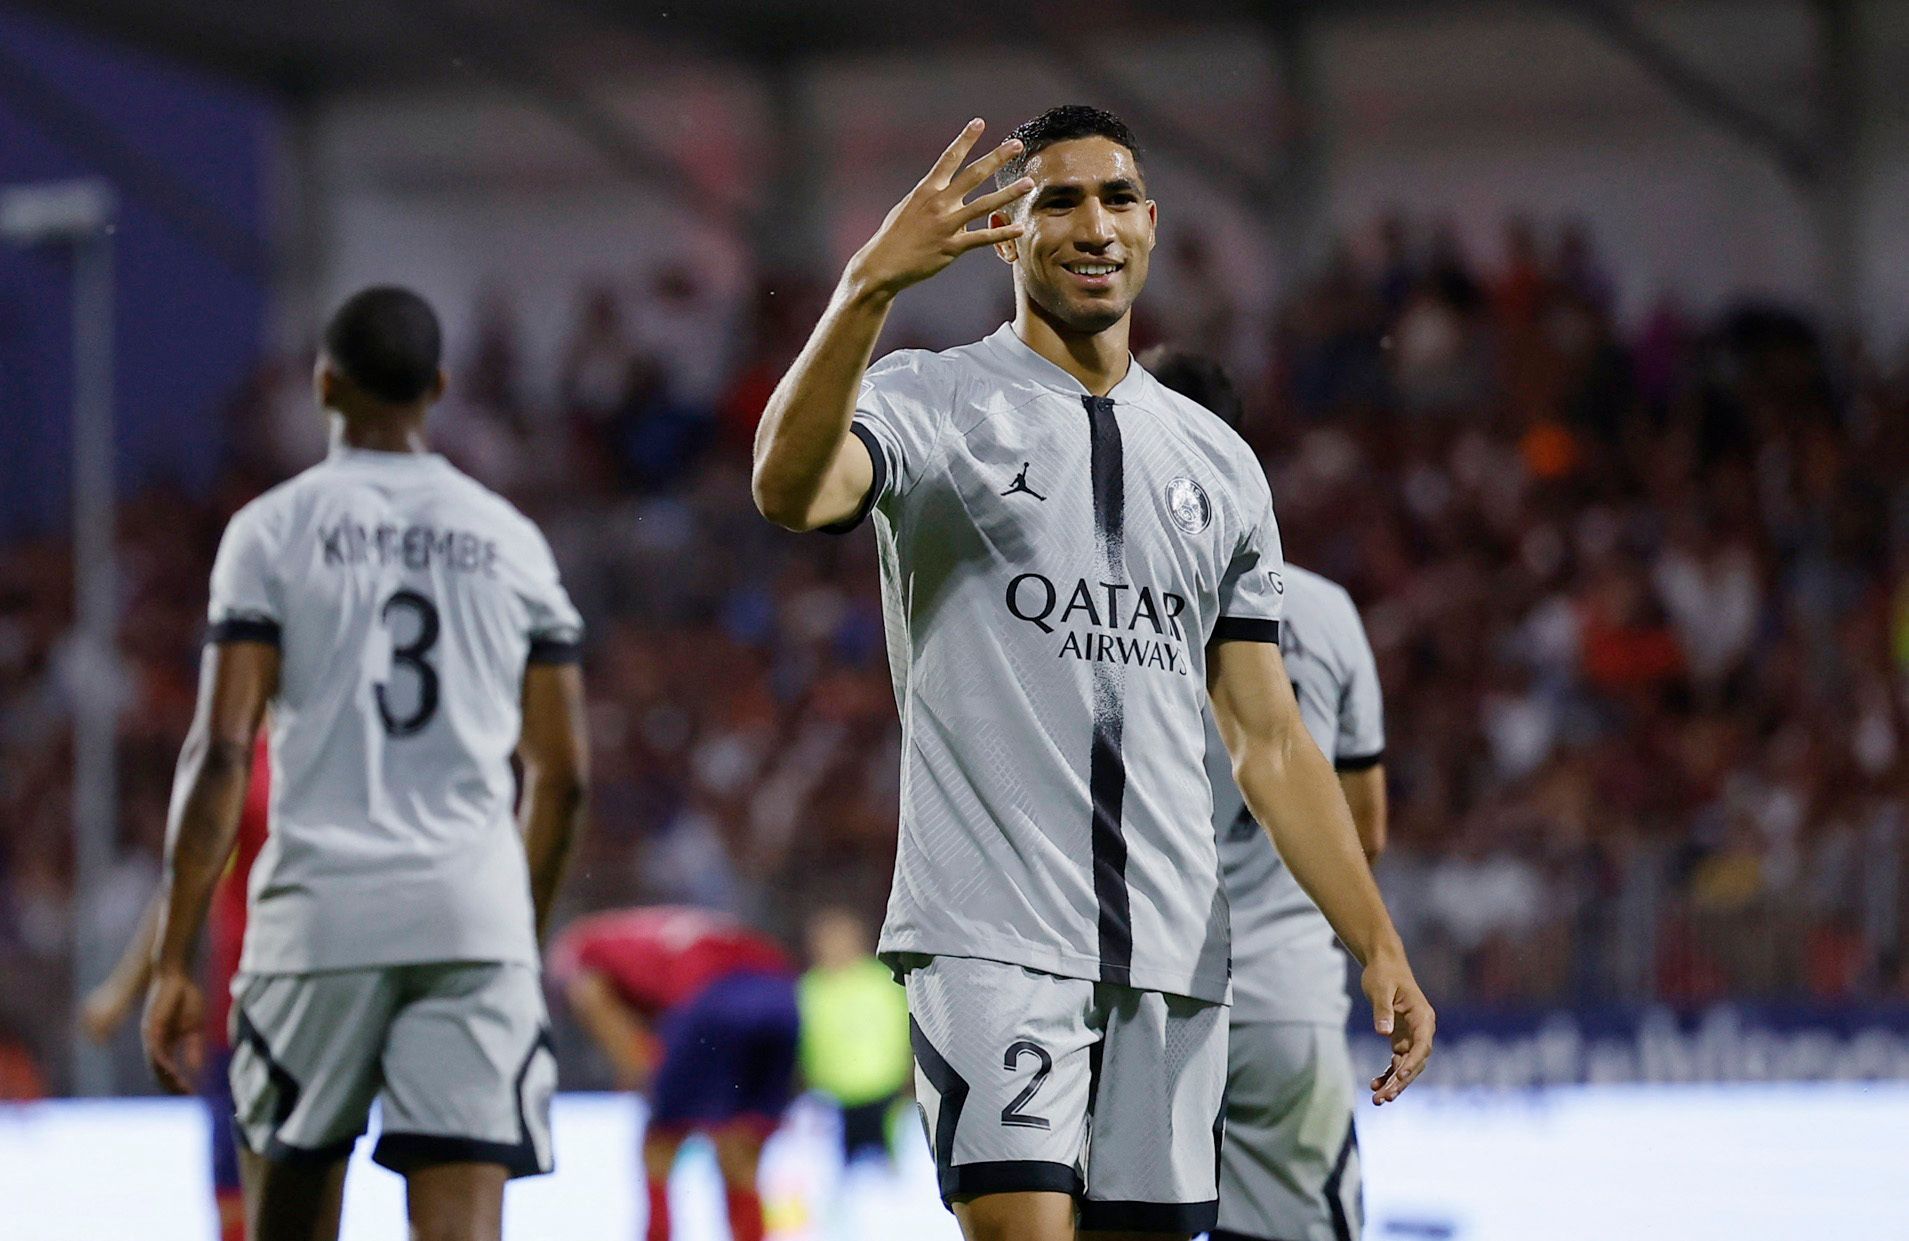 Manchester United: Red Devils targeting Achraf Hakimi -Follow up